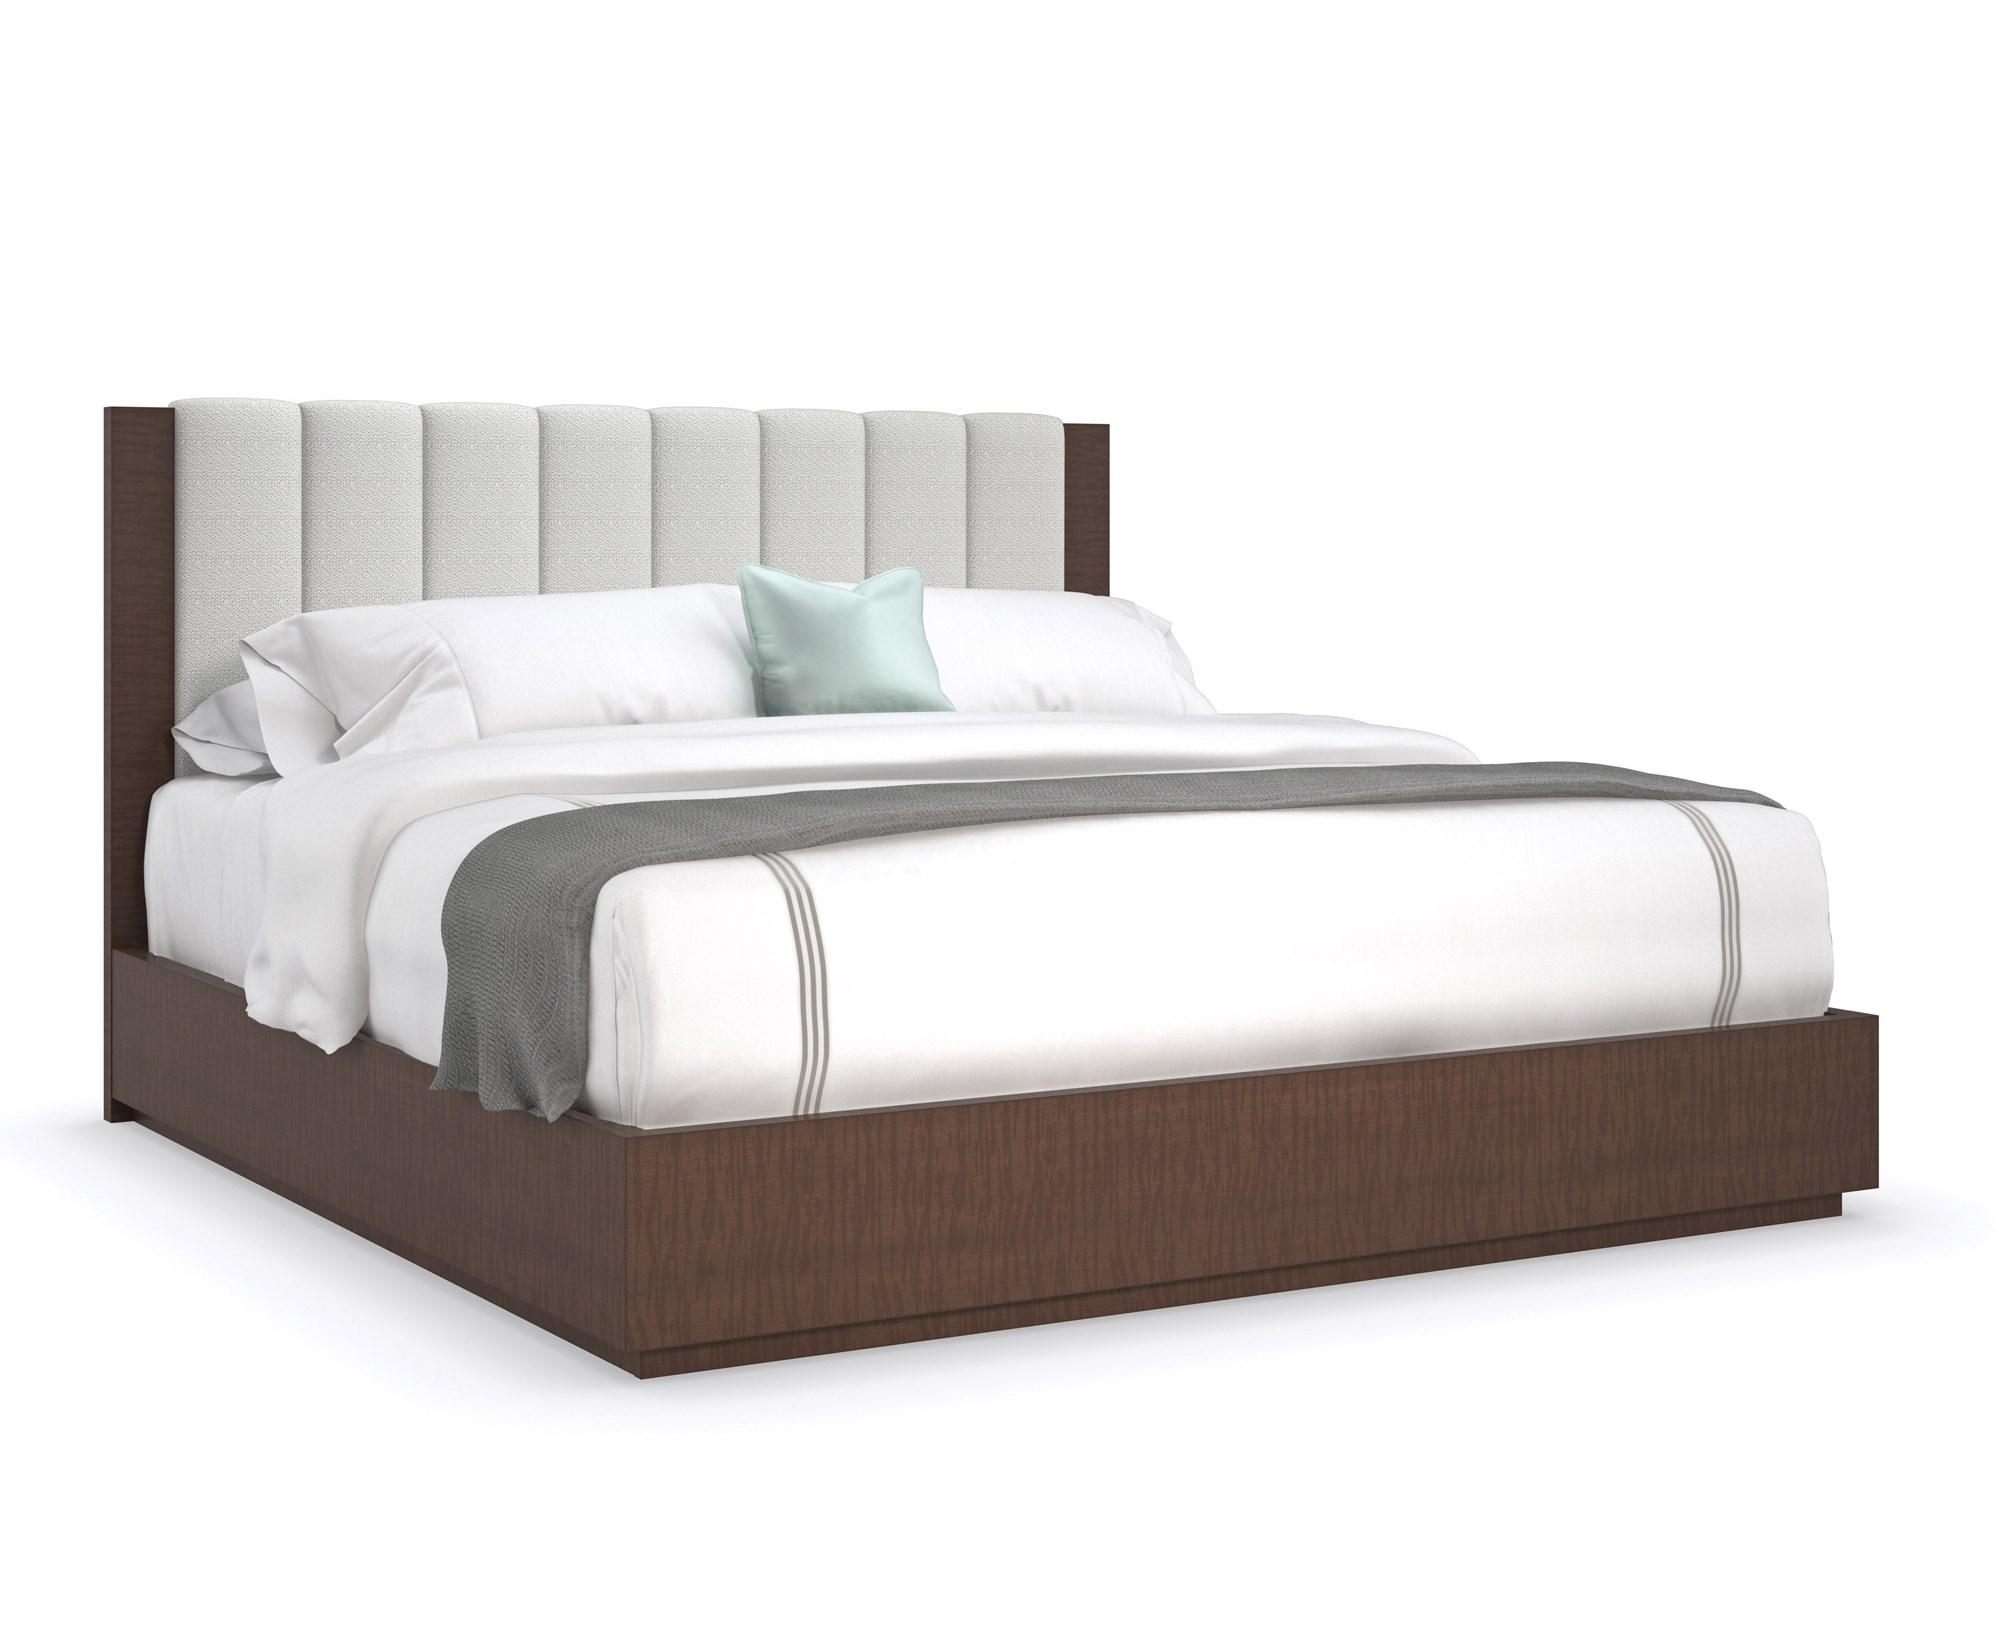 Contemporary Platform Bed INNER PASSION CLA-421-121-EK in Light Gray, Brown Fabric